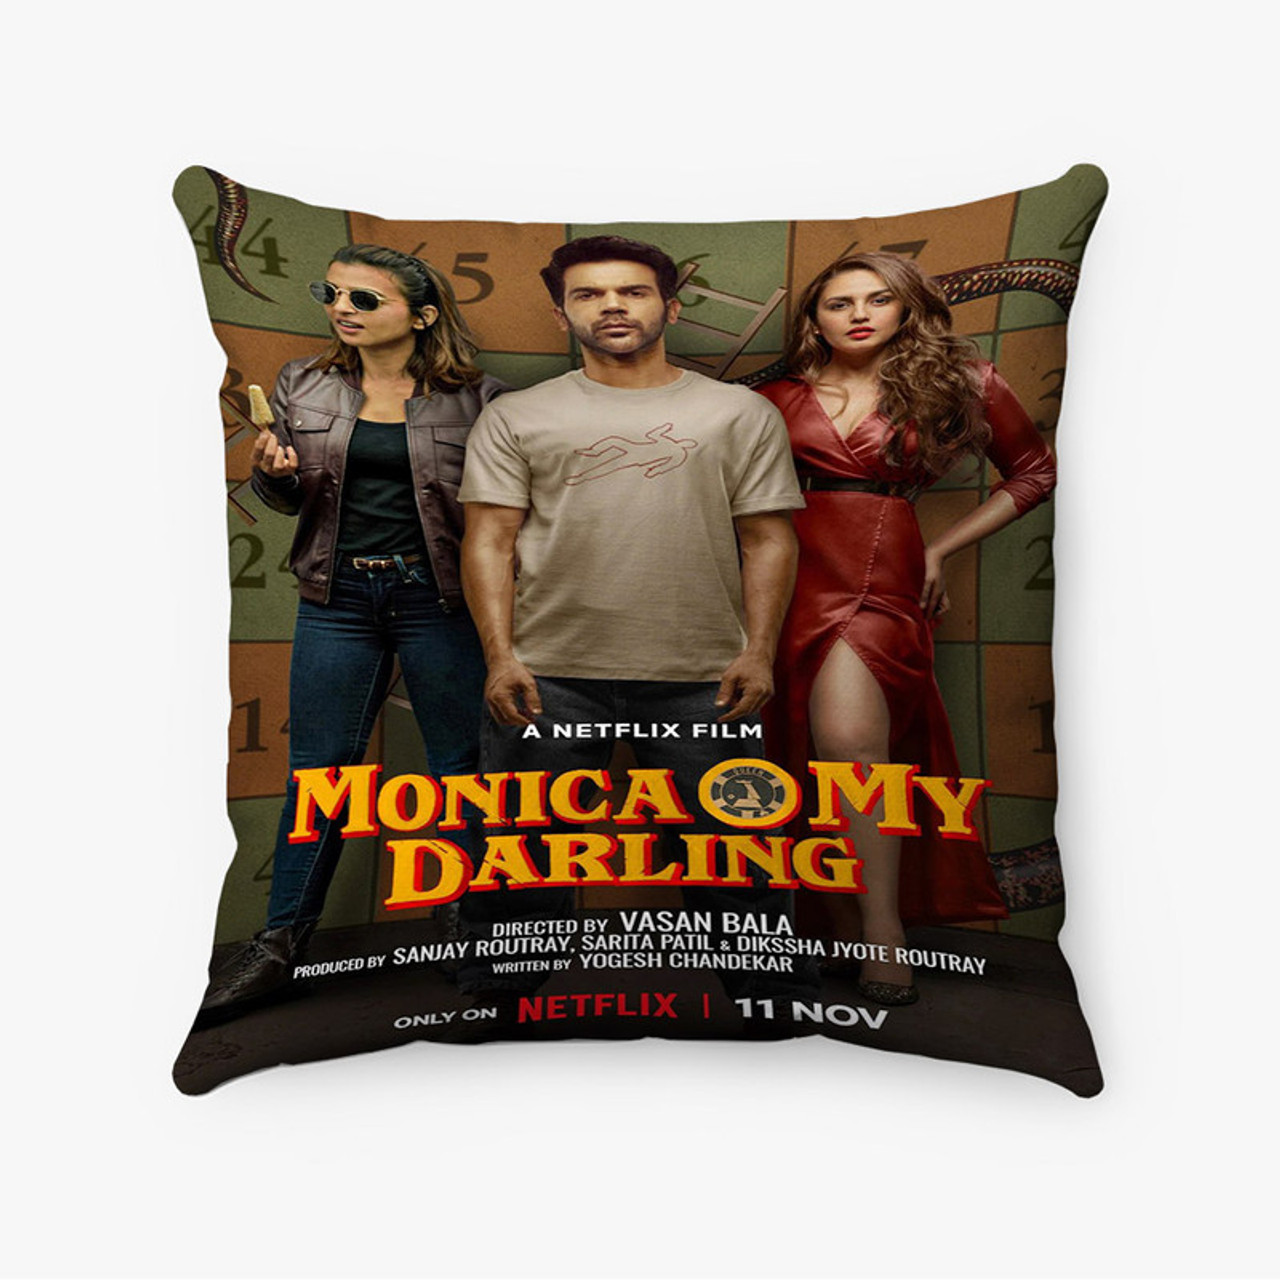 https://cdn11.bigcommerce.com/s-xhmrmcecz5/images/stencil/1280x1280/products/219388/224748/Monica-O-My-Darling-Custom-Pillow-Case__17916.1674534206.jpg?c=1